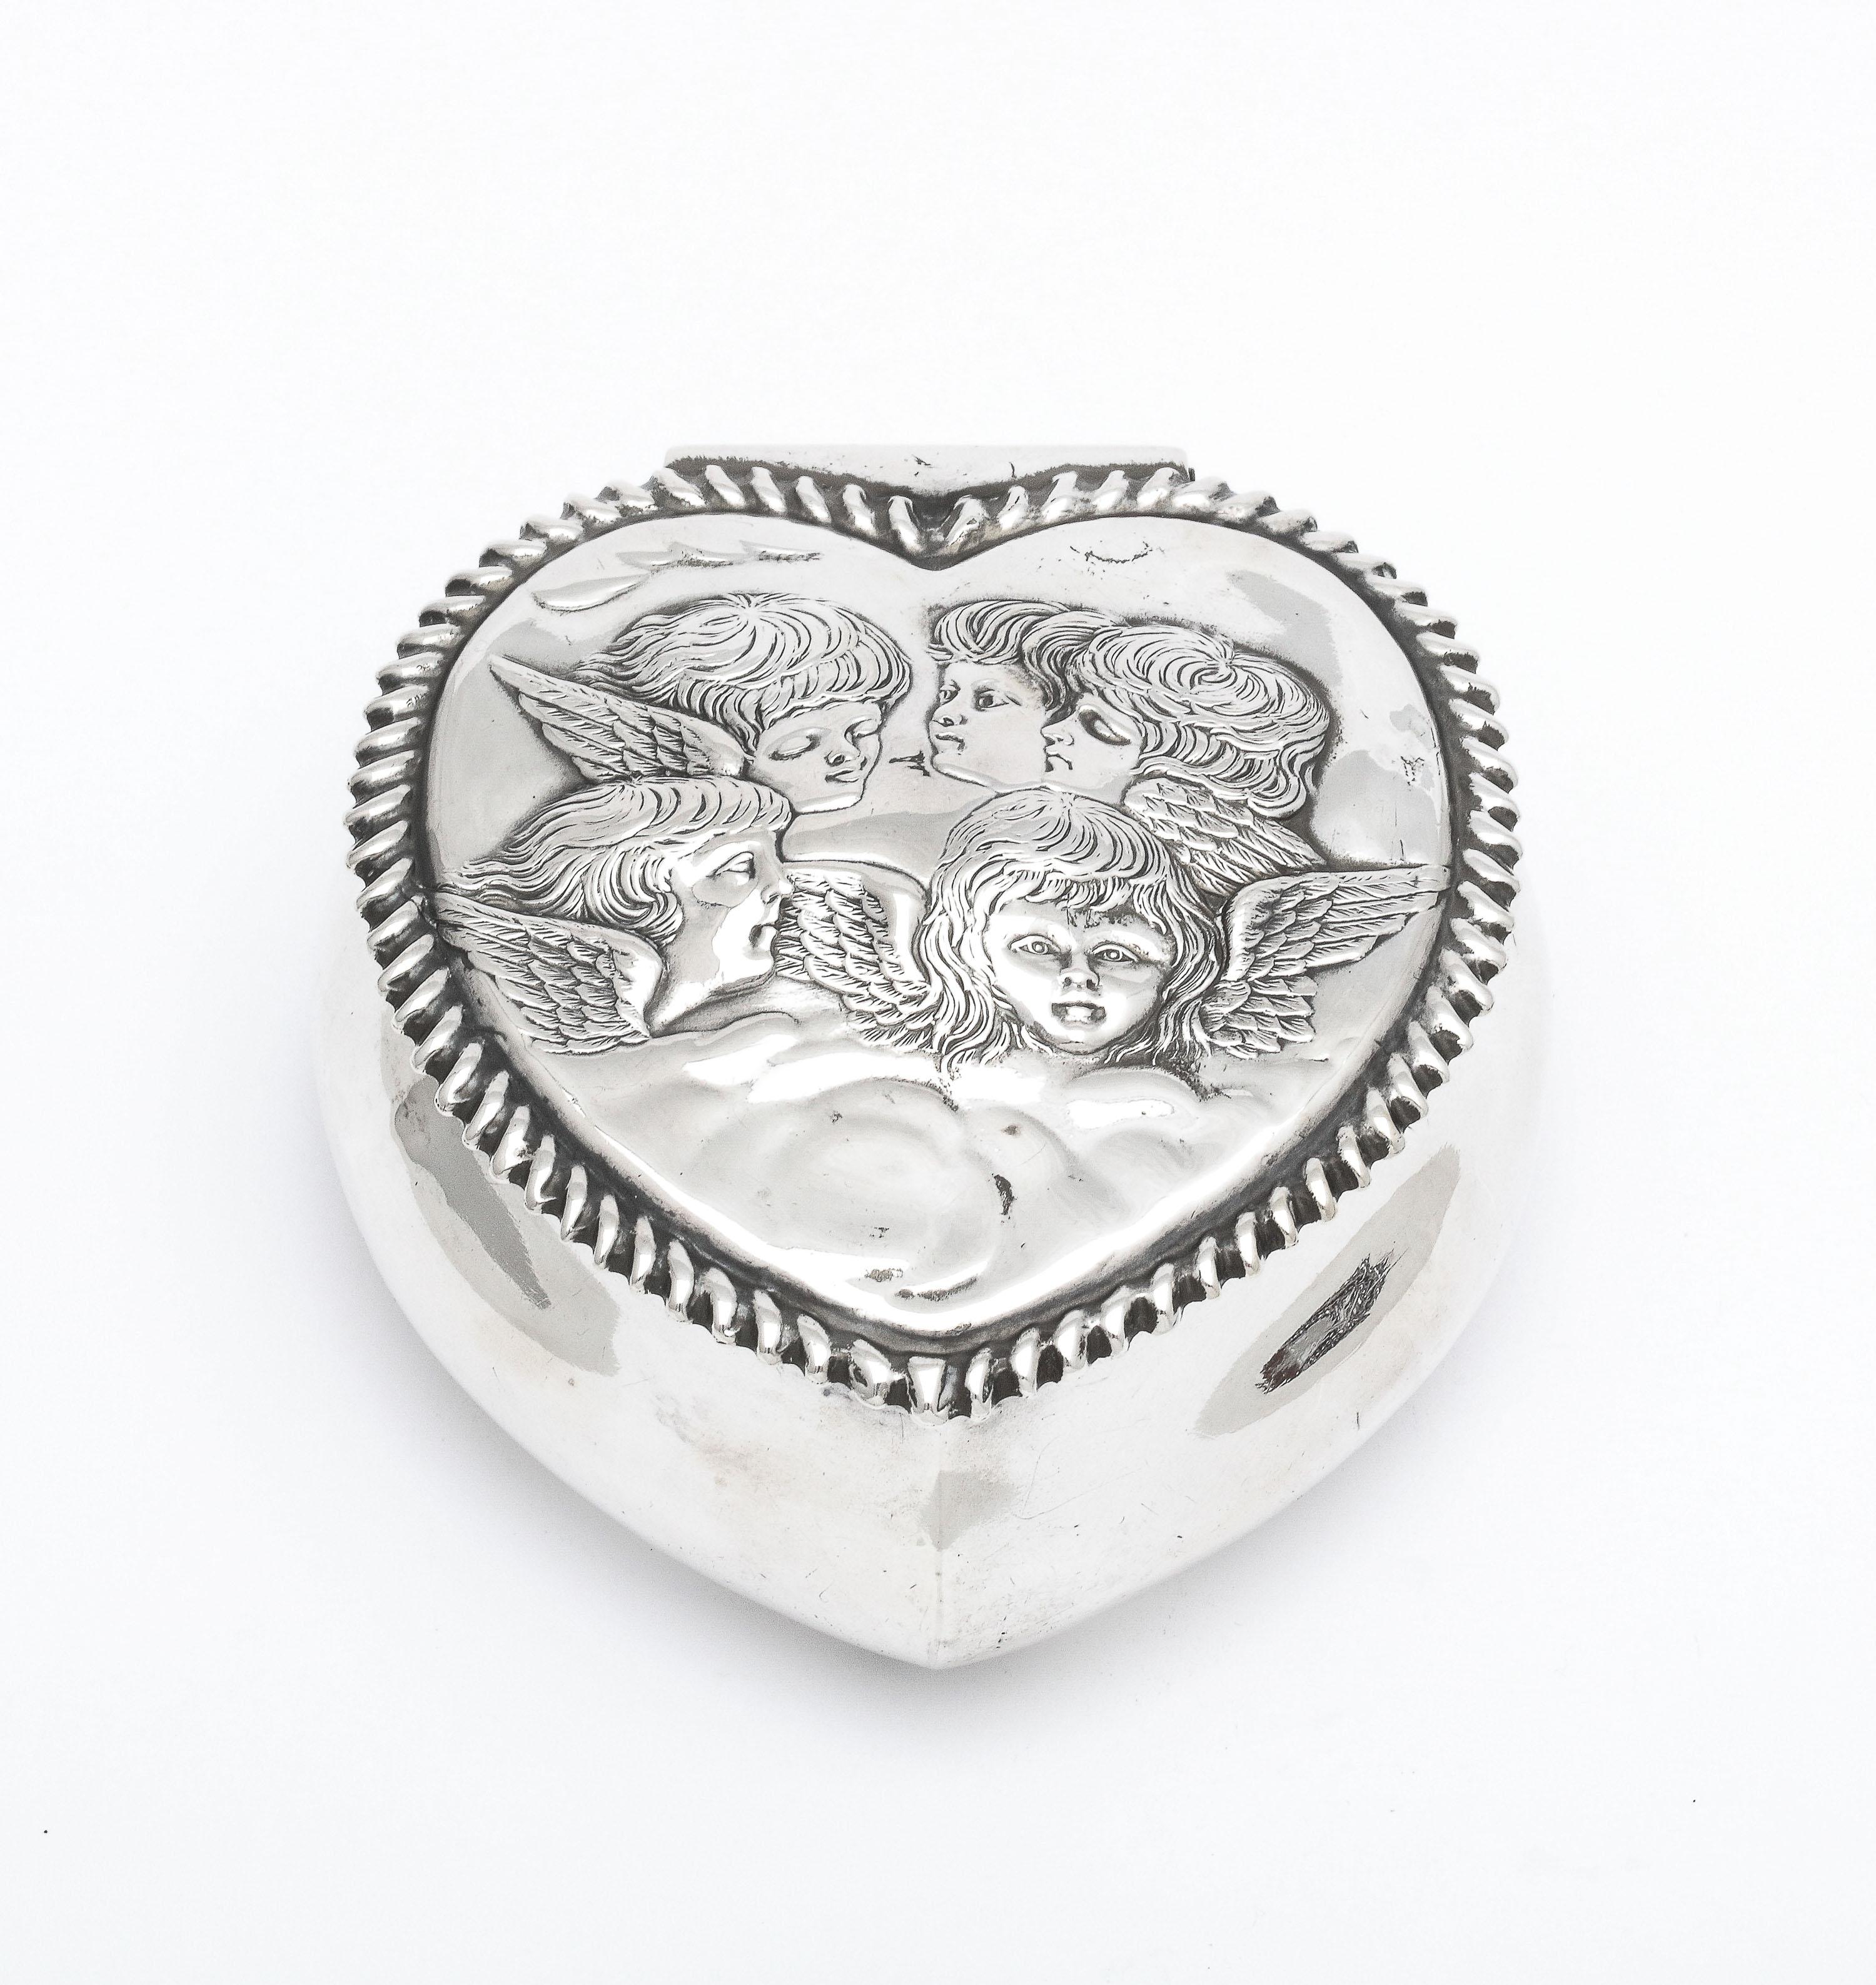 Victorian, sterling silver heart-form trinkets box with hinged lid and gilt interior, Birmingham, England, year-hallmarked for 1897, H. Matthews - Maker. Lid is designed with a Joshua Reynolds motif - The Cherubs in the Clouds. Border of lid is